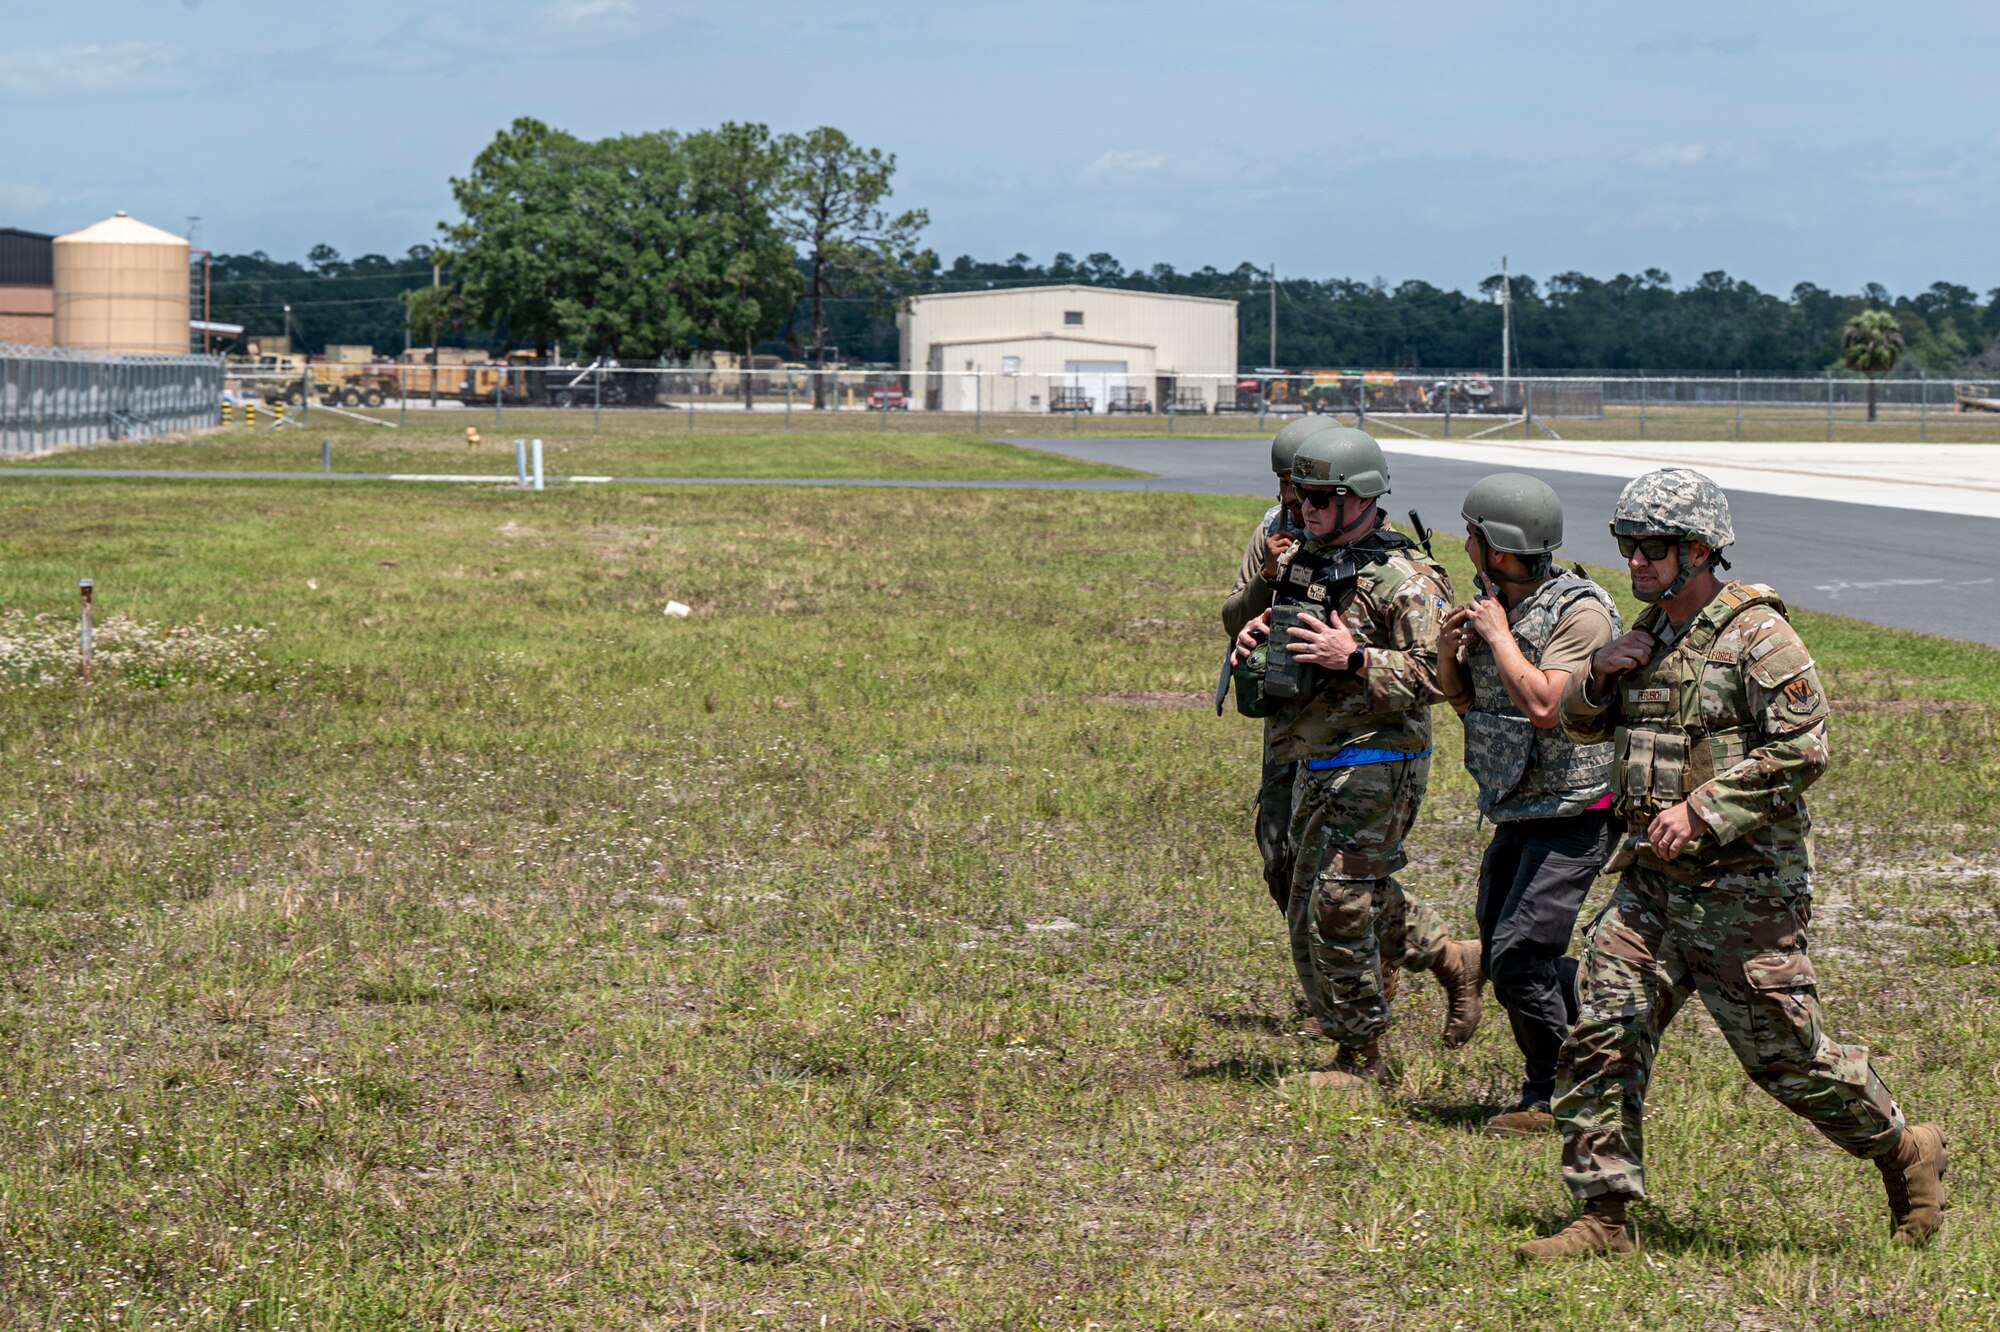 U.S. Air Force Airmen assigned to the 23rd Wing sprint across a field during Exercise Ready Tiger 24-1 at Avon Park Air Force Range, Florida, April 10, 2024. Airmen donned the protective gear in response to an increased simulated threat at an austere contingency location. Ready Tiger 24-1 is a readiness exercise demonstrating the 23rd Wing’s ability to plan, prepare and execute operations and maintenance to project air power in contested and dispersed locations, defending the United States’ interests and allies. (U.S. Air Force photo by Airman 1st Class Leonid Soubbotine)